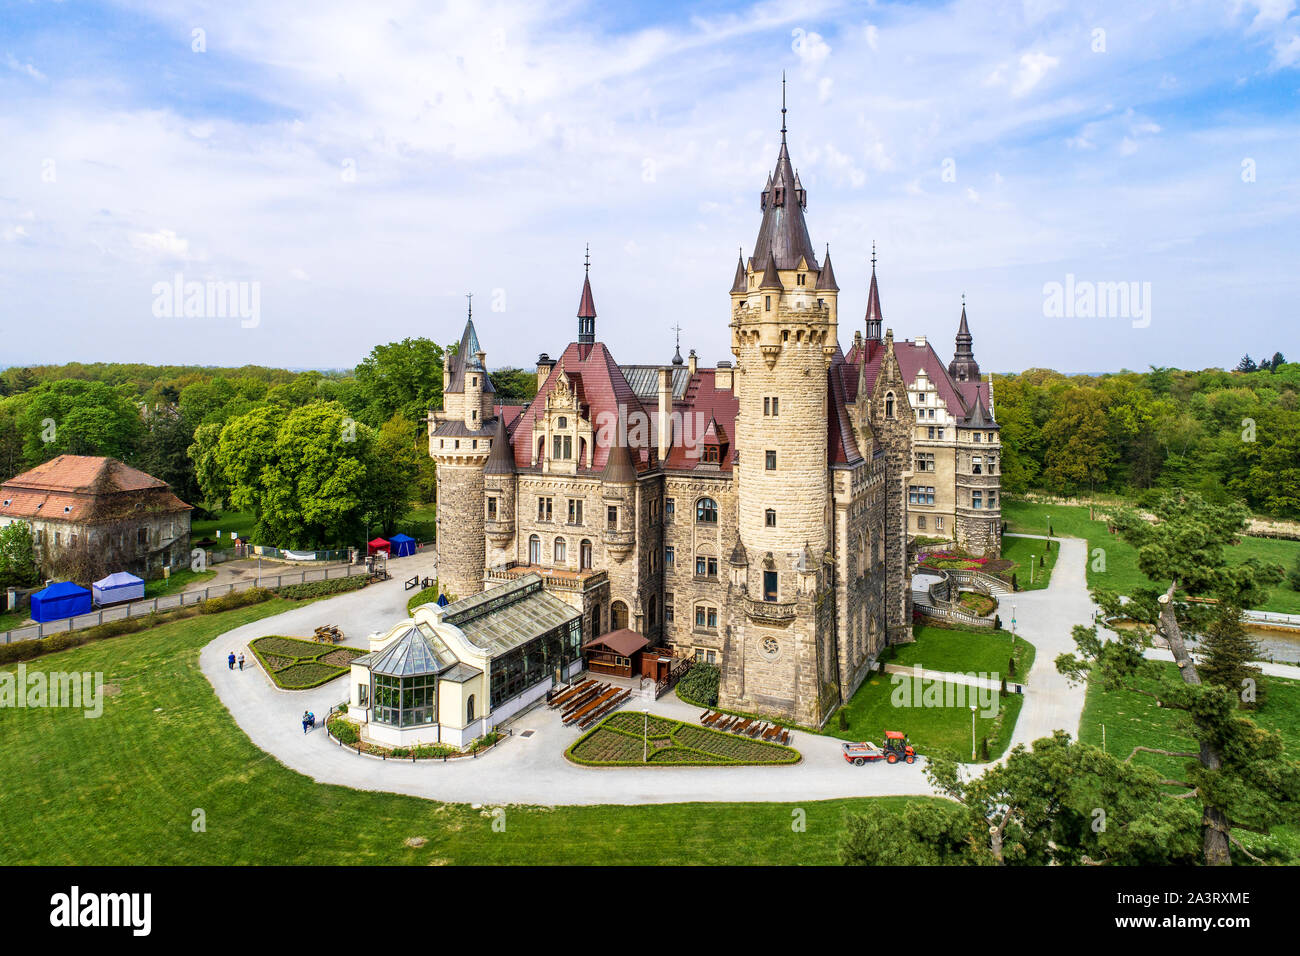 Fabulous historic castle in Moszna near Opole, Silesia, Poland. Built in XVII century, extended from 1900 to 1914. Stock Photo